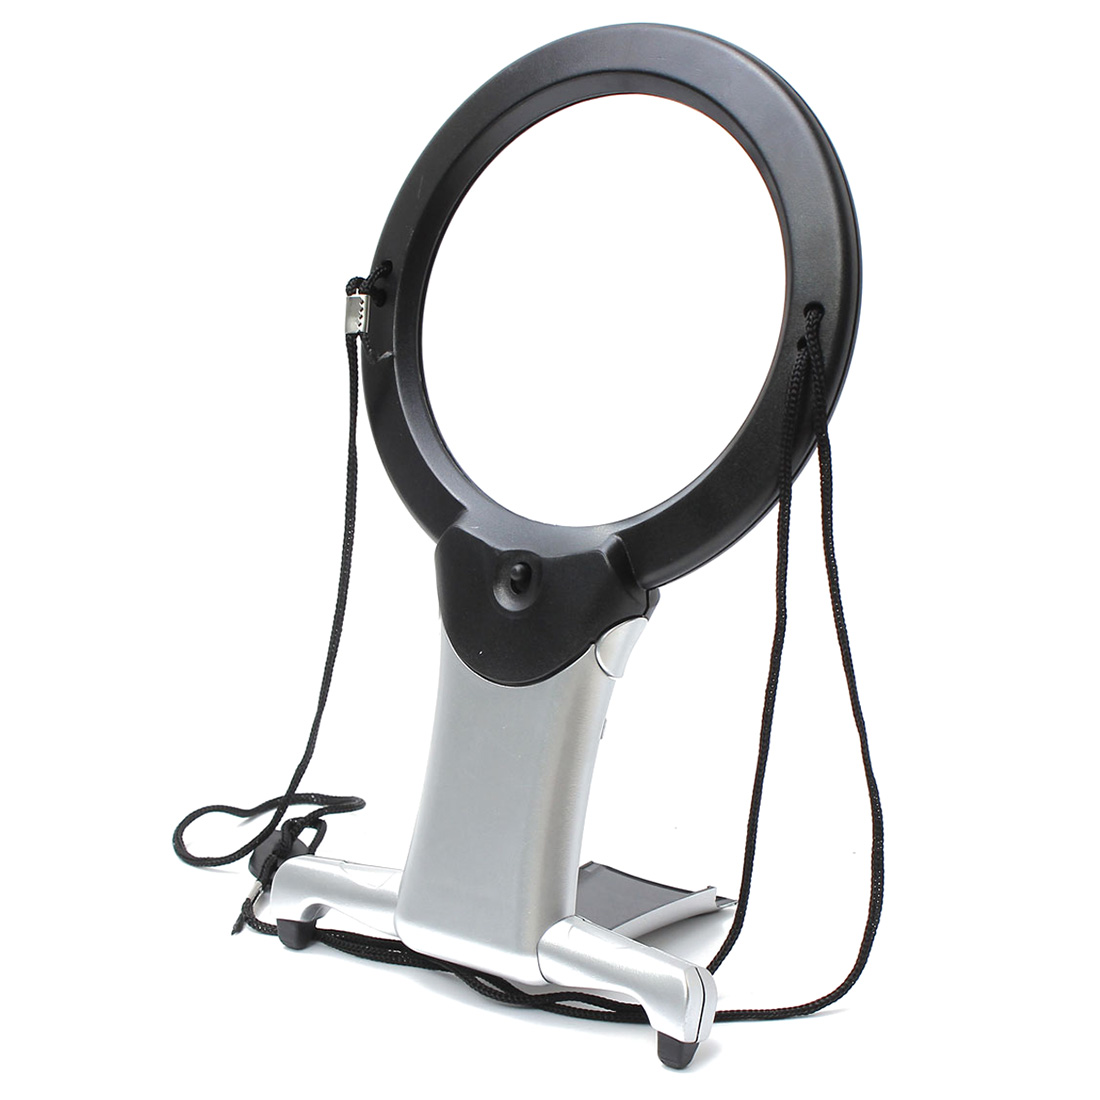 giant large hands free magnifying glass with light led magnifier